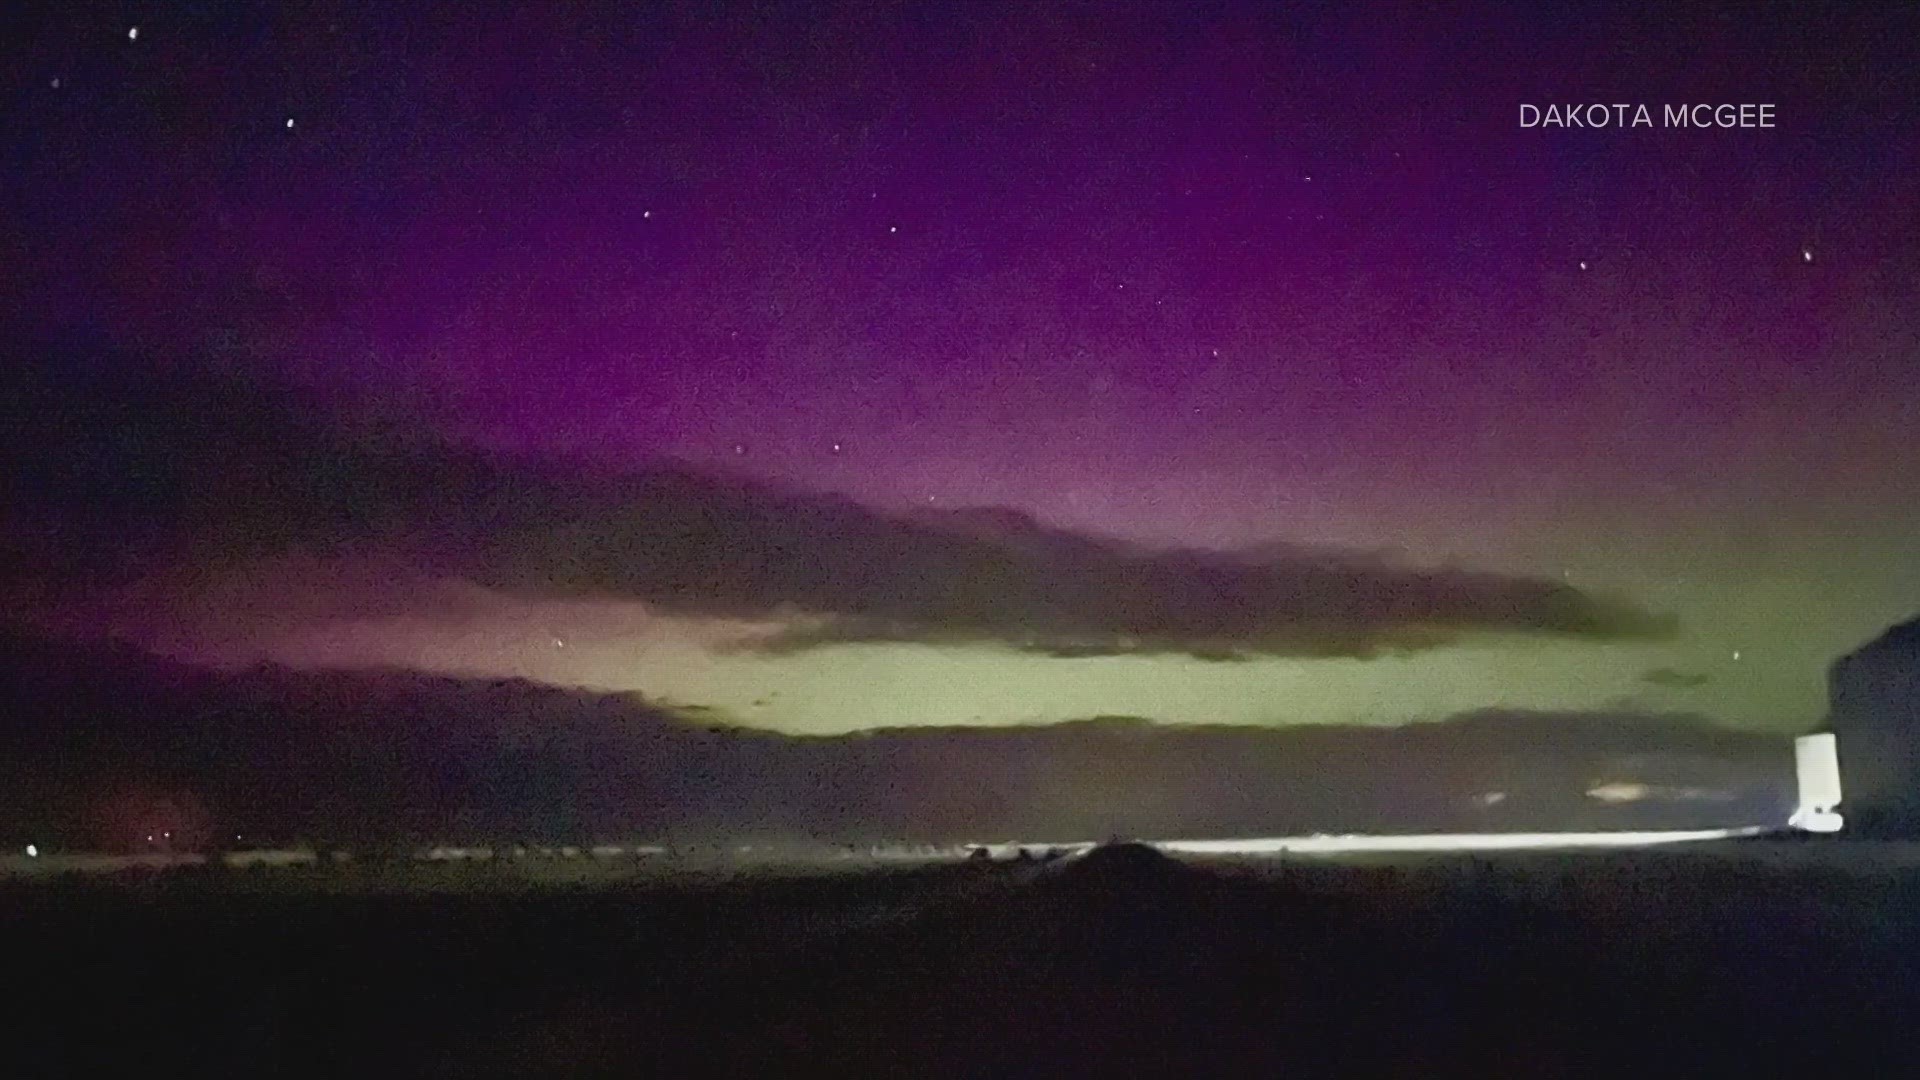 Meteorologist Chris Bianchi explains why the aurora borealis shows up in Colorado.